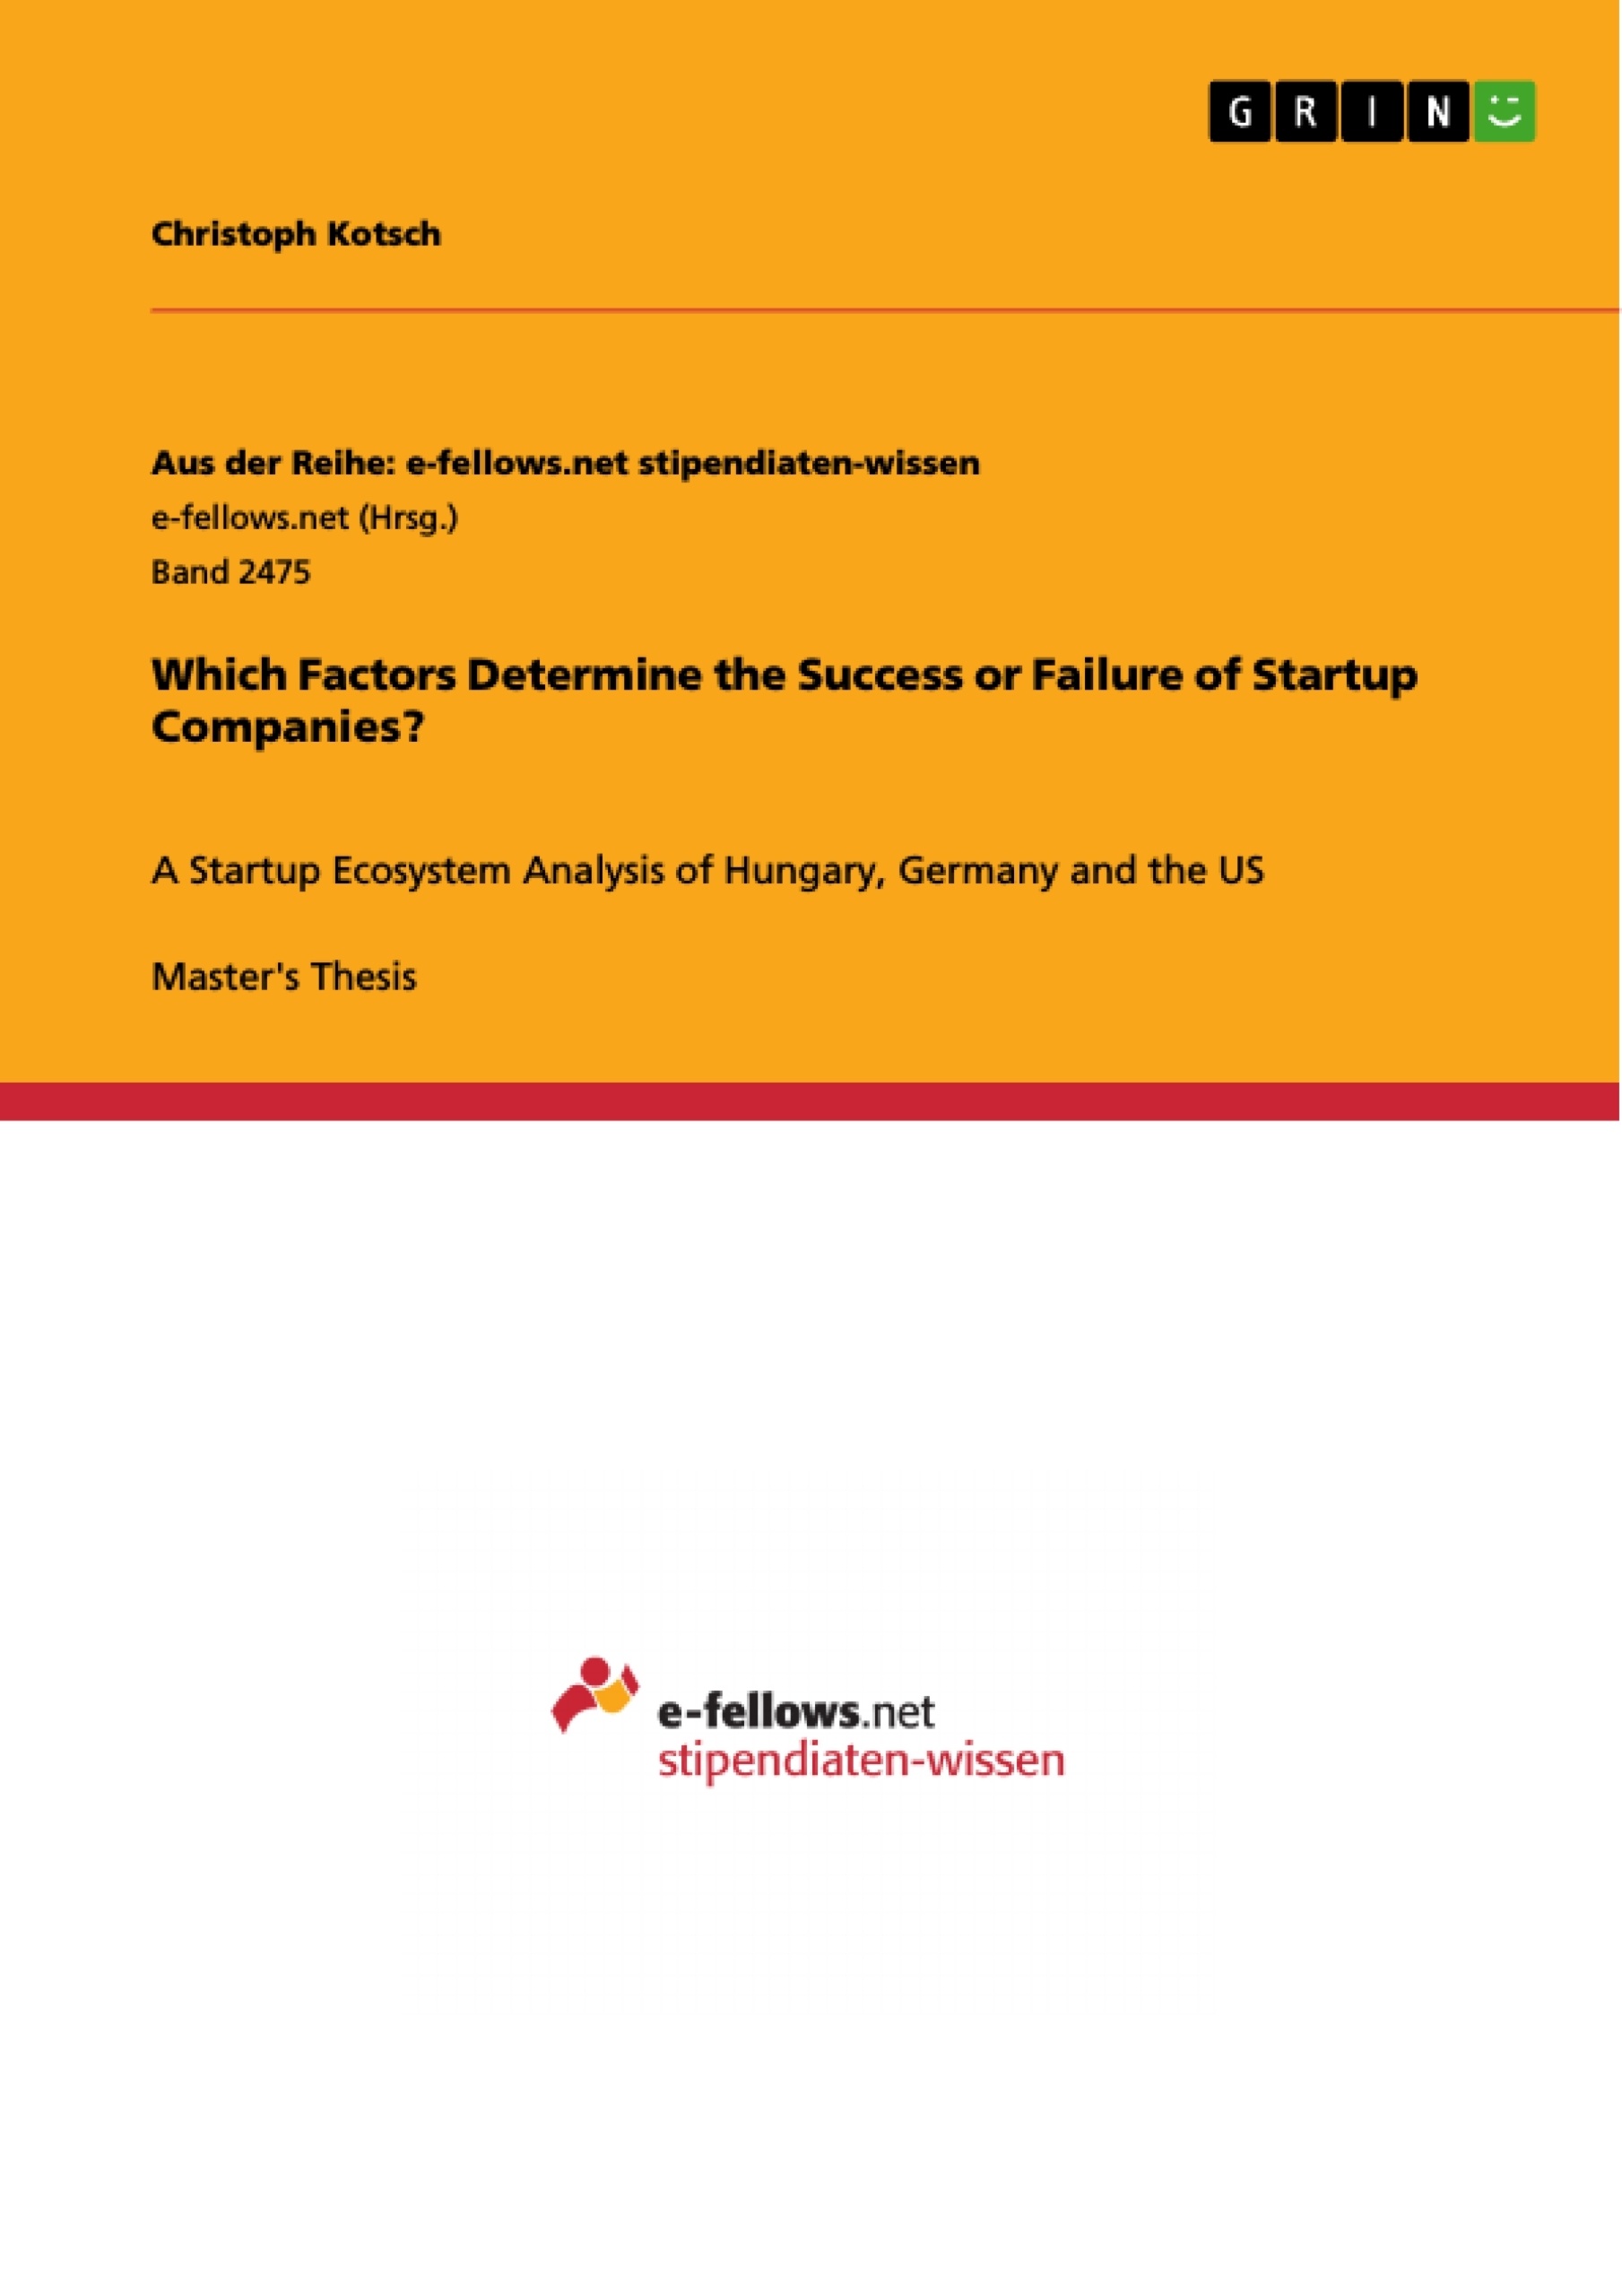 Título: Which Factors Determine the Success or Failure of Startup Companies?